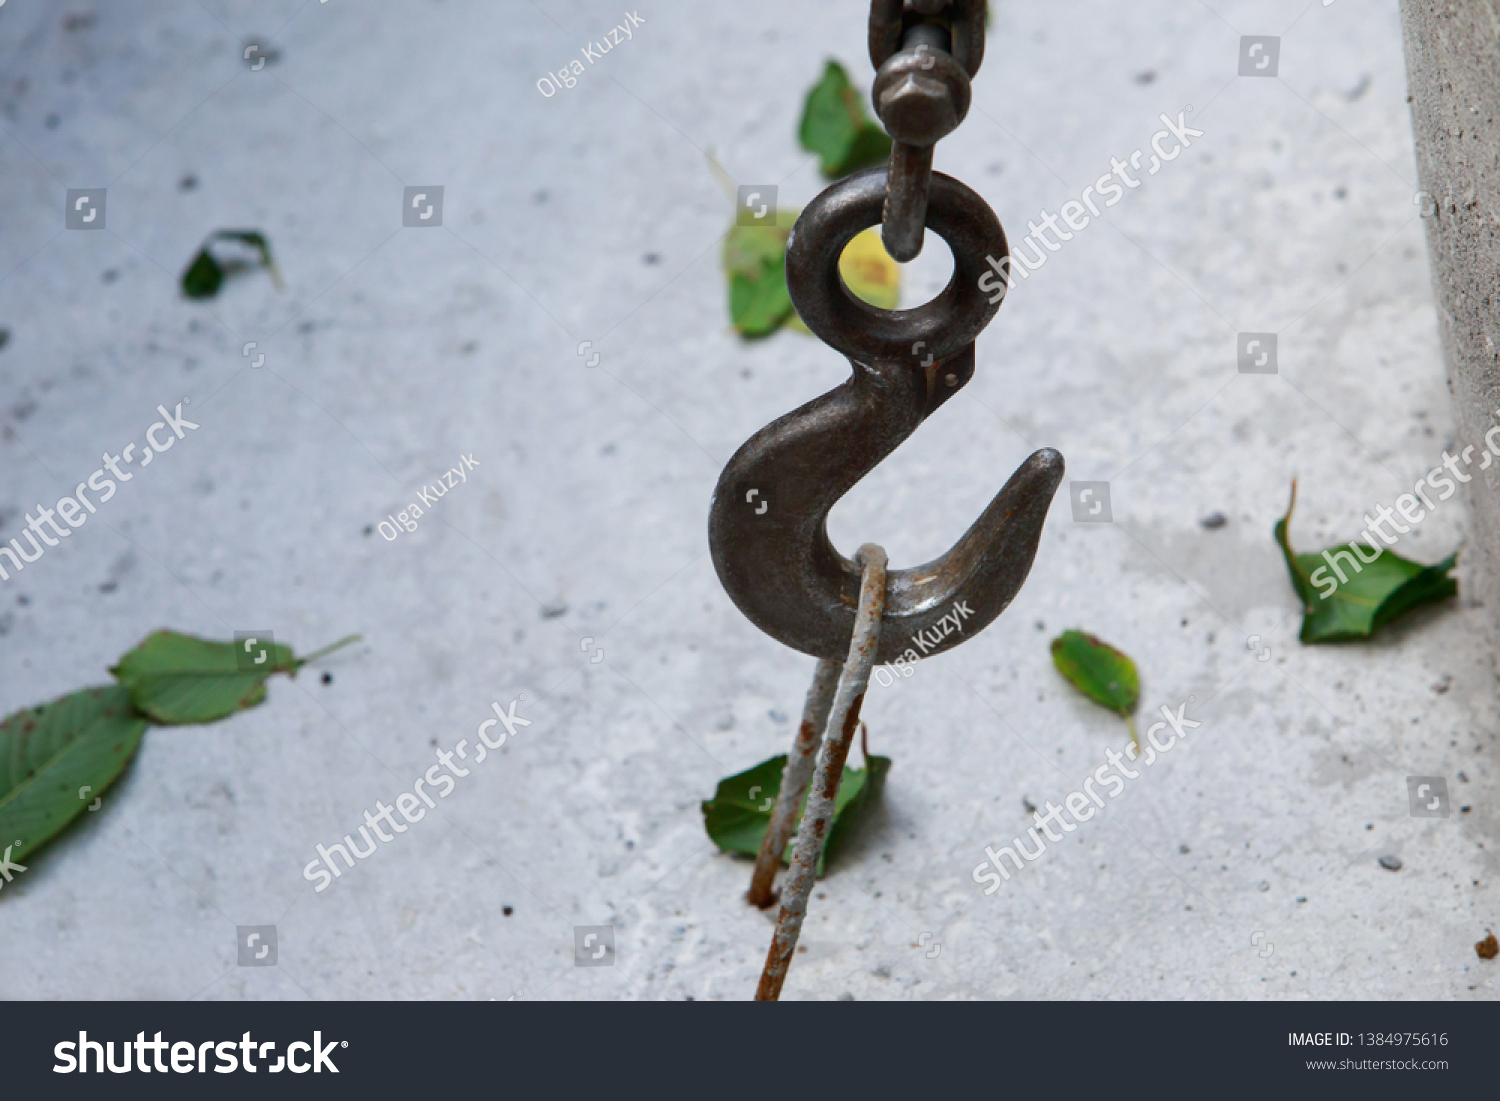 Large metal hook hooked on concrete structure #1384975616